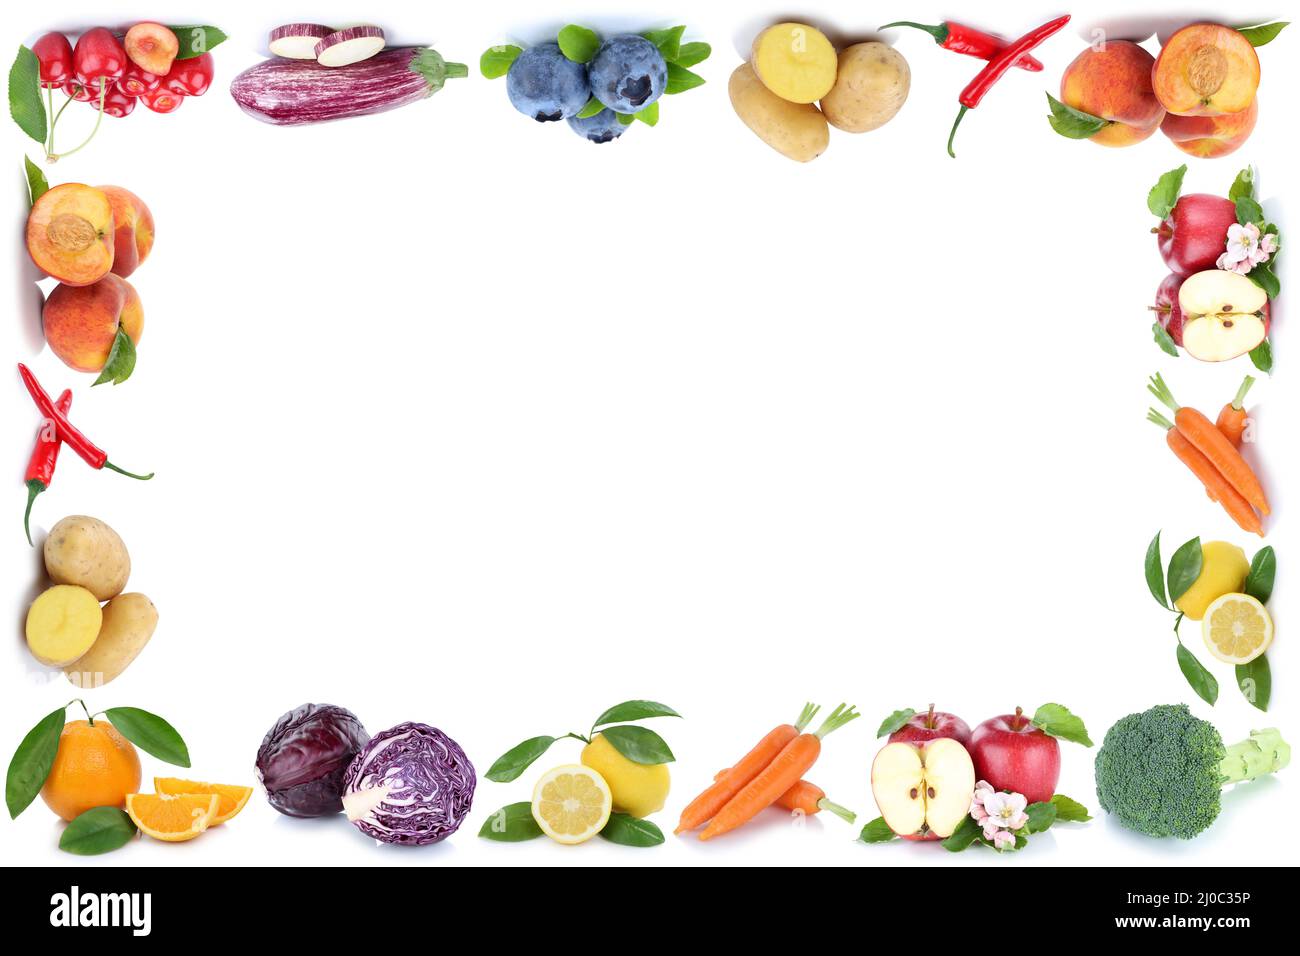 Fruits and vegetables fruits frame text free space copyspace apple ...